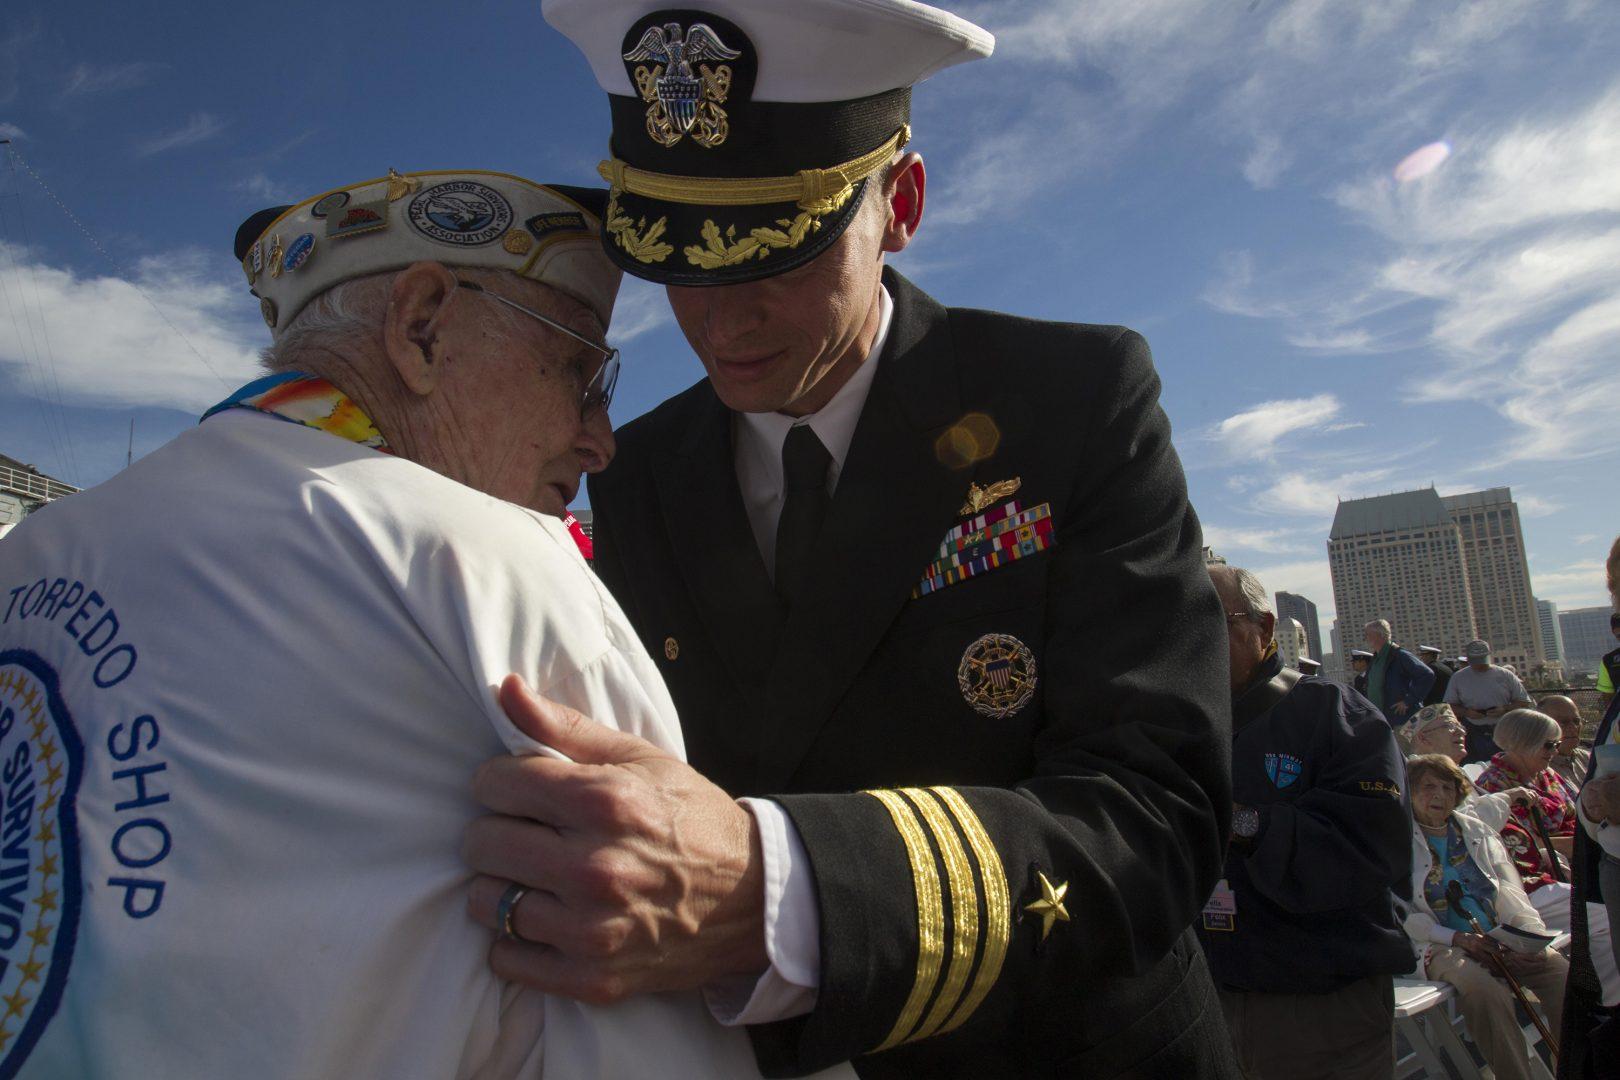 CDR Judd Krier, commander of the USS Pearl Harbor, talks with survivor Clayton Schenkelberg, 92, who worked at the torpedo shop at the time of the attack, during a ceremony to commemorate the 74th anniversary of the attack on Pearl Harbor on Monday, Dec. 7, 2015, on the USS Midway Museum in San Diego. (John Gibbins/San Diego Union-Tribune/TNS)